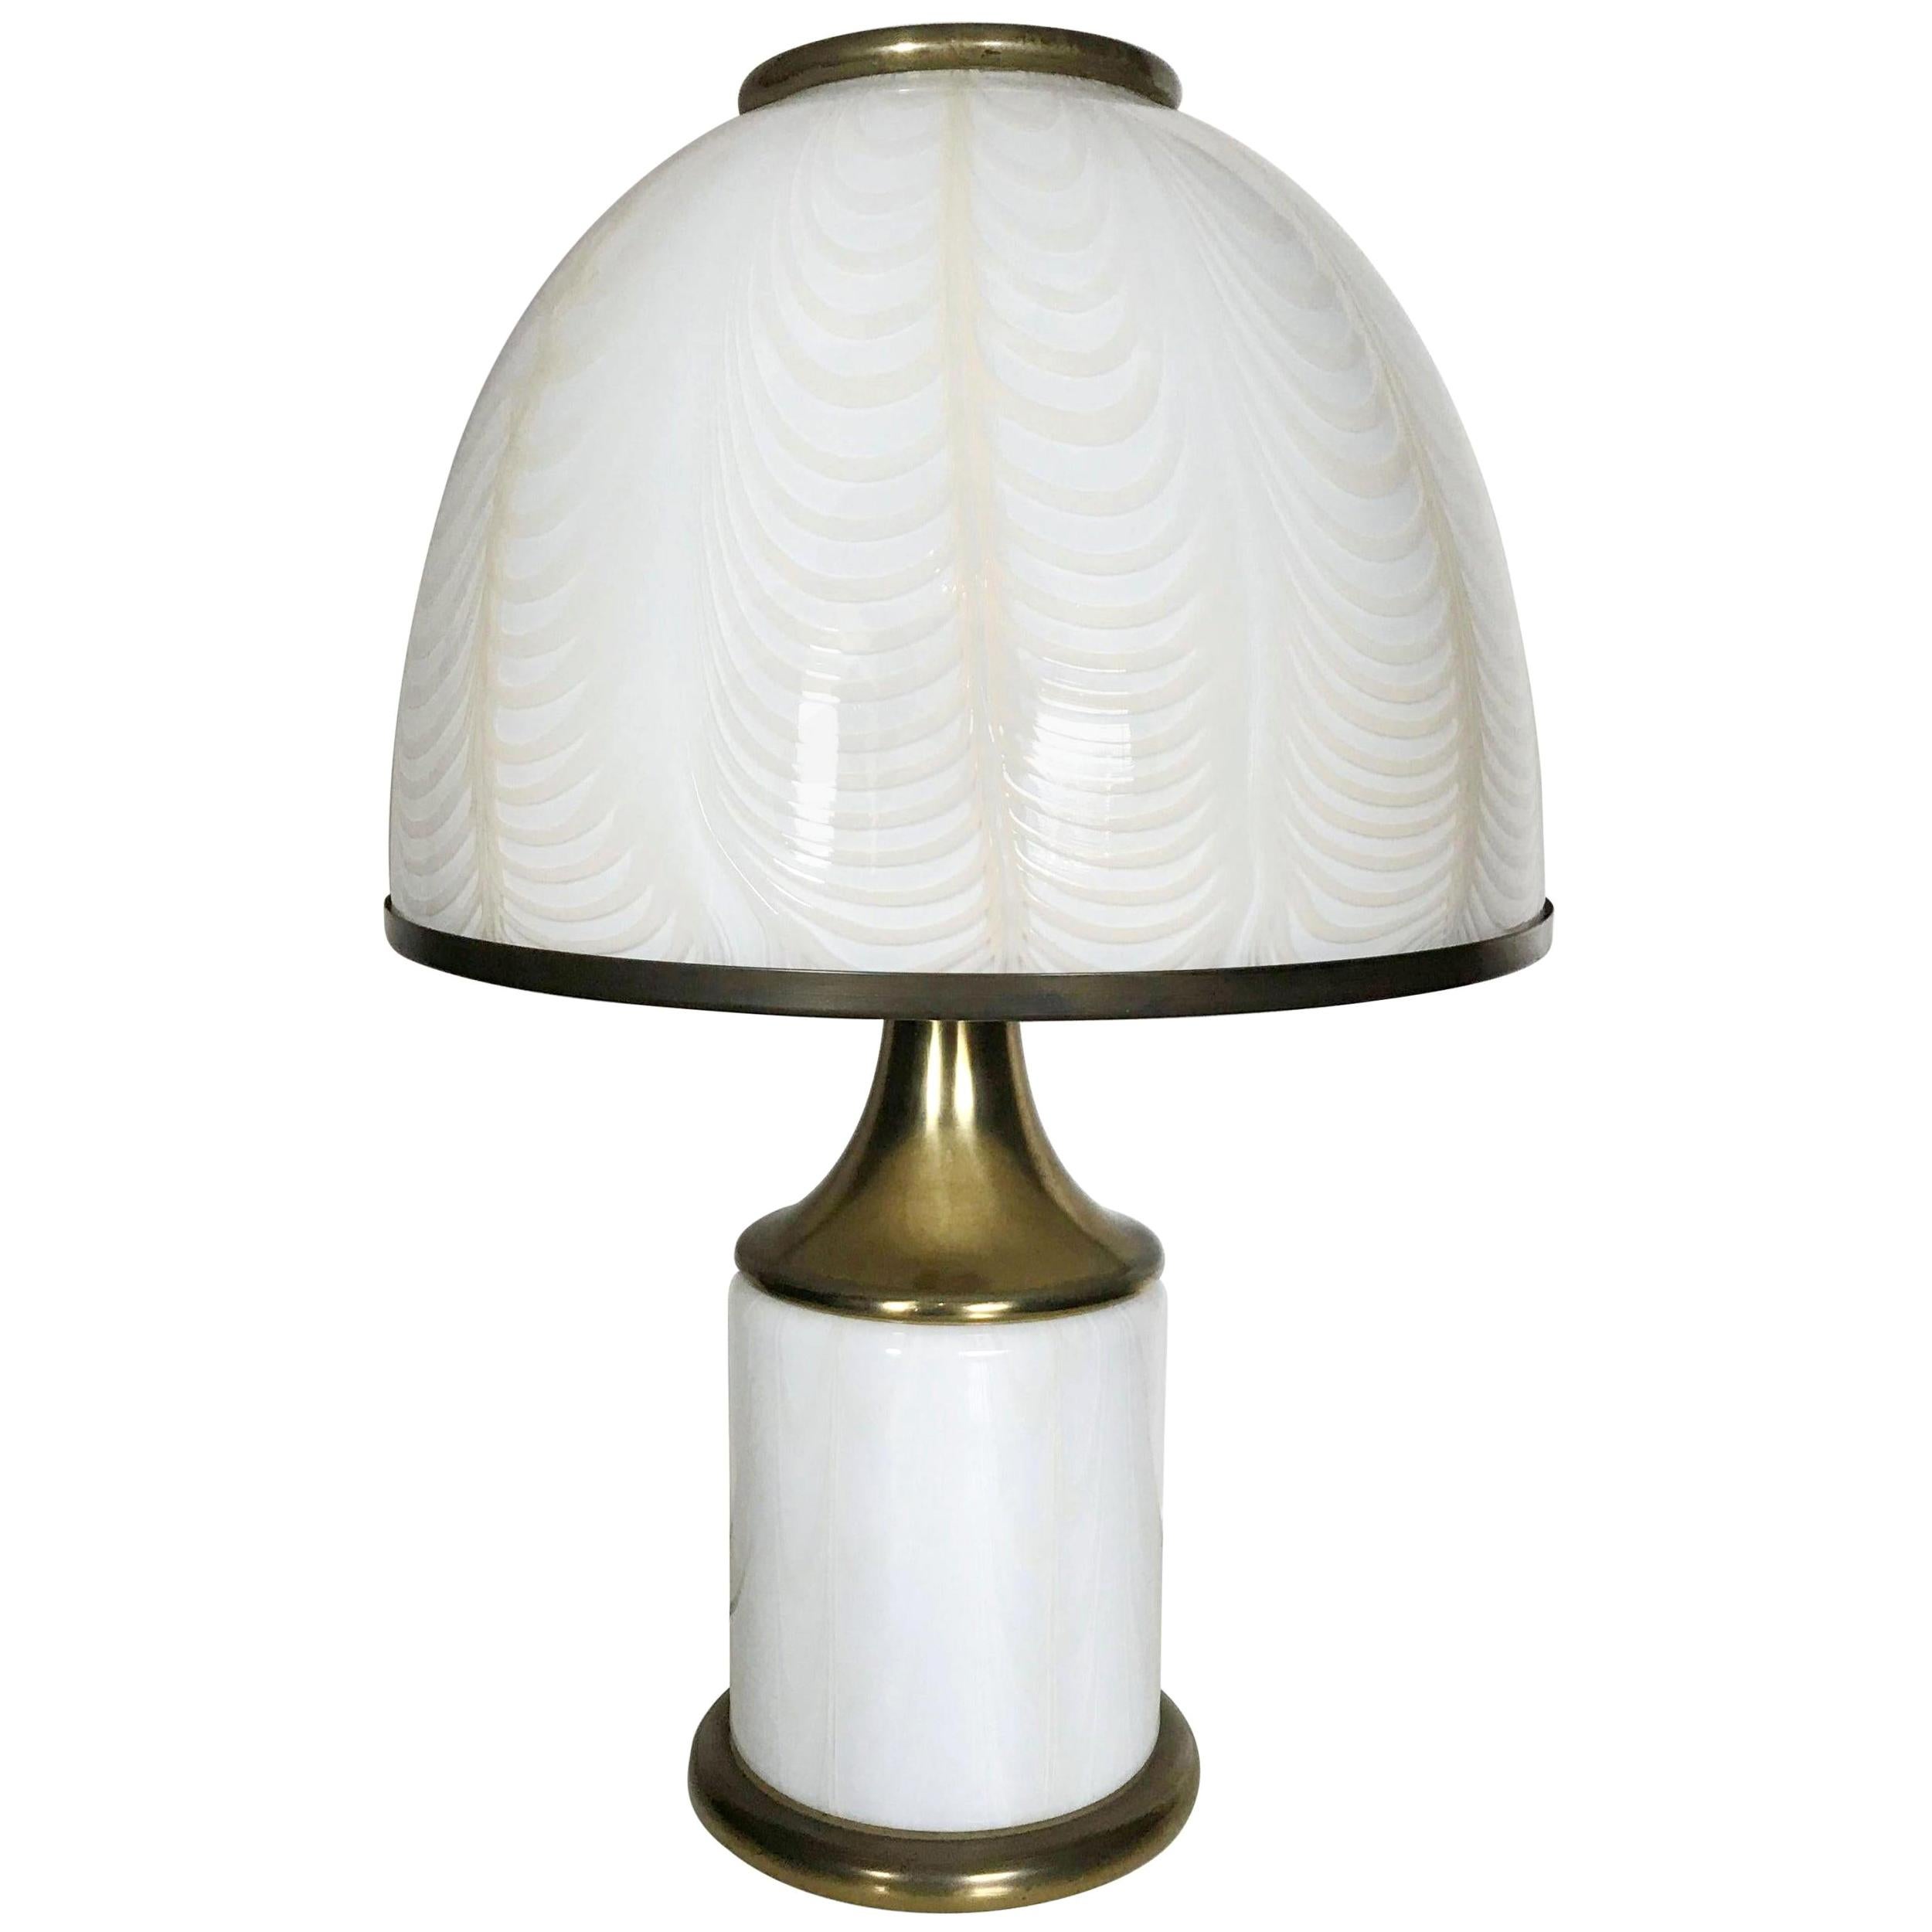 Vintage Italian Table Lamp w/ Cream Murano Glass by F. Fabbian for Mazzega, 1970 For Sale